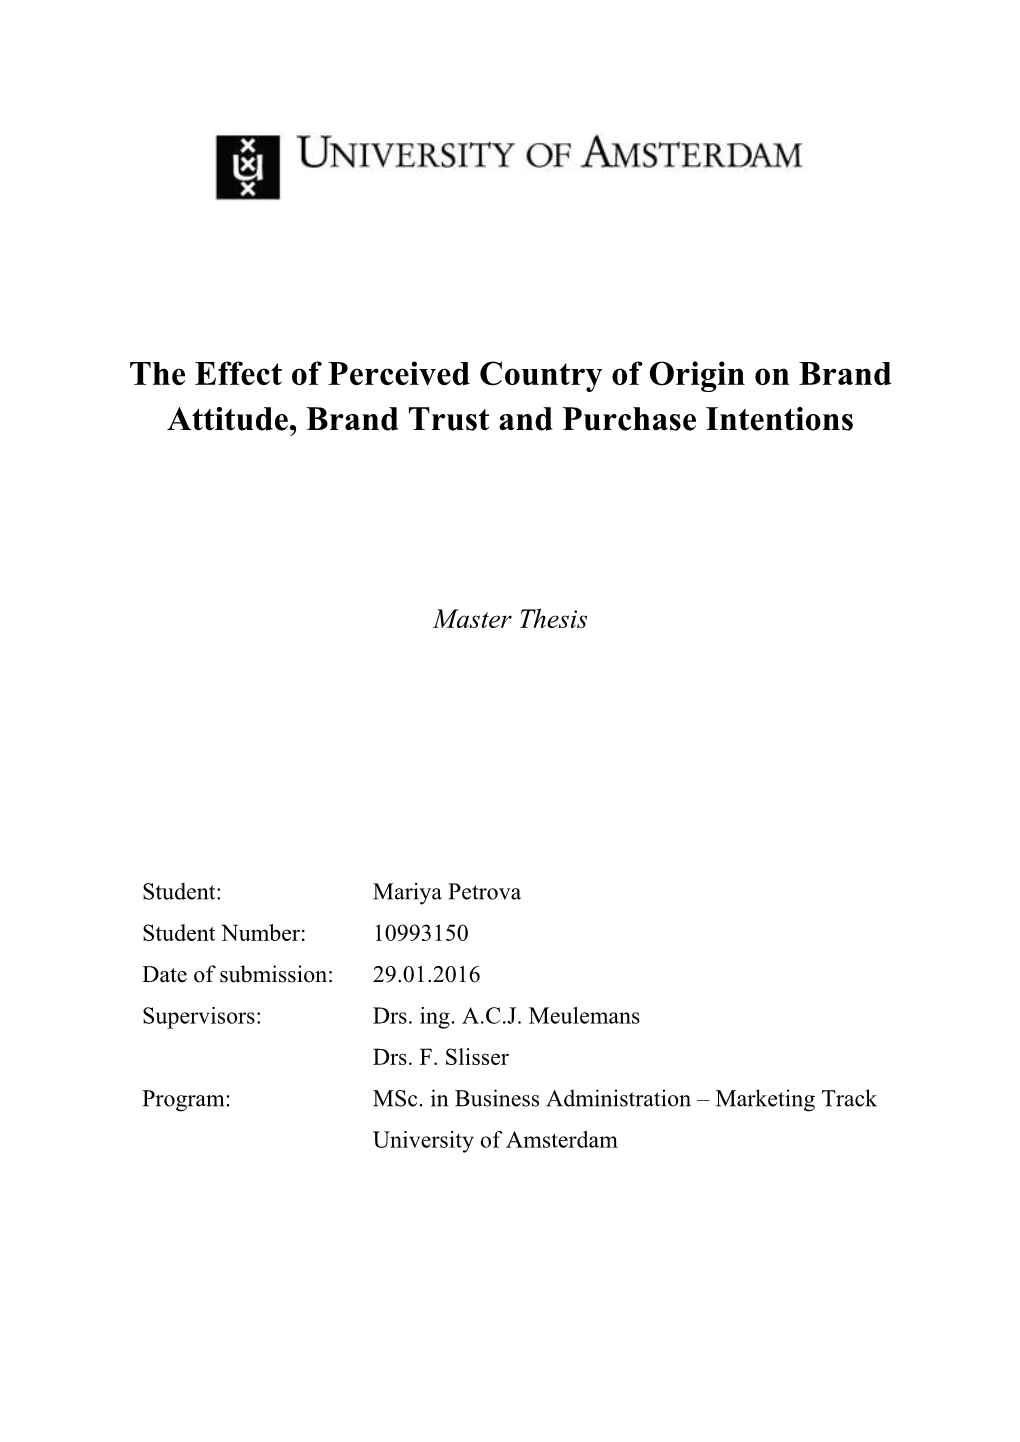 The Effect of Perceived Country of Origin on Brand Attitude, Brand Trust and Purchase Intentions